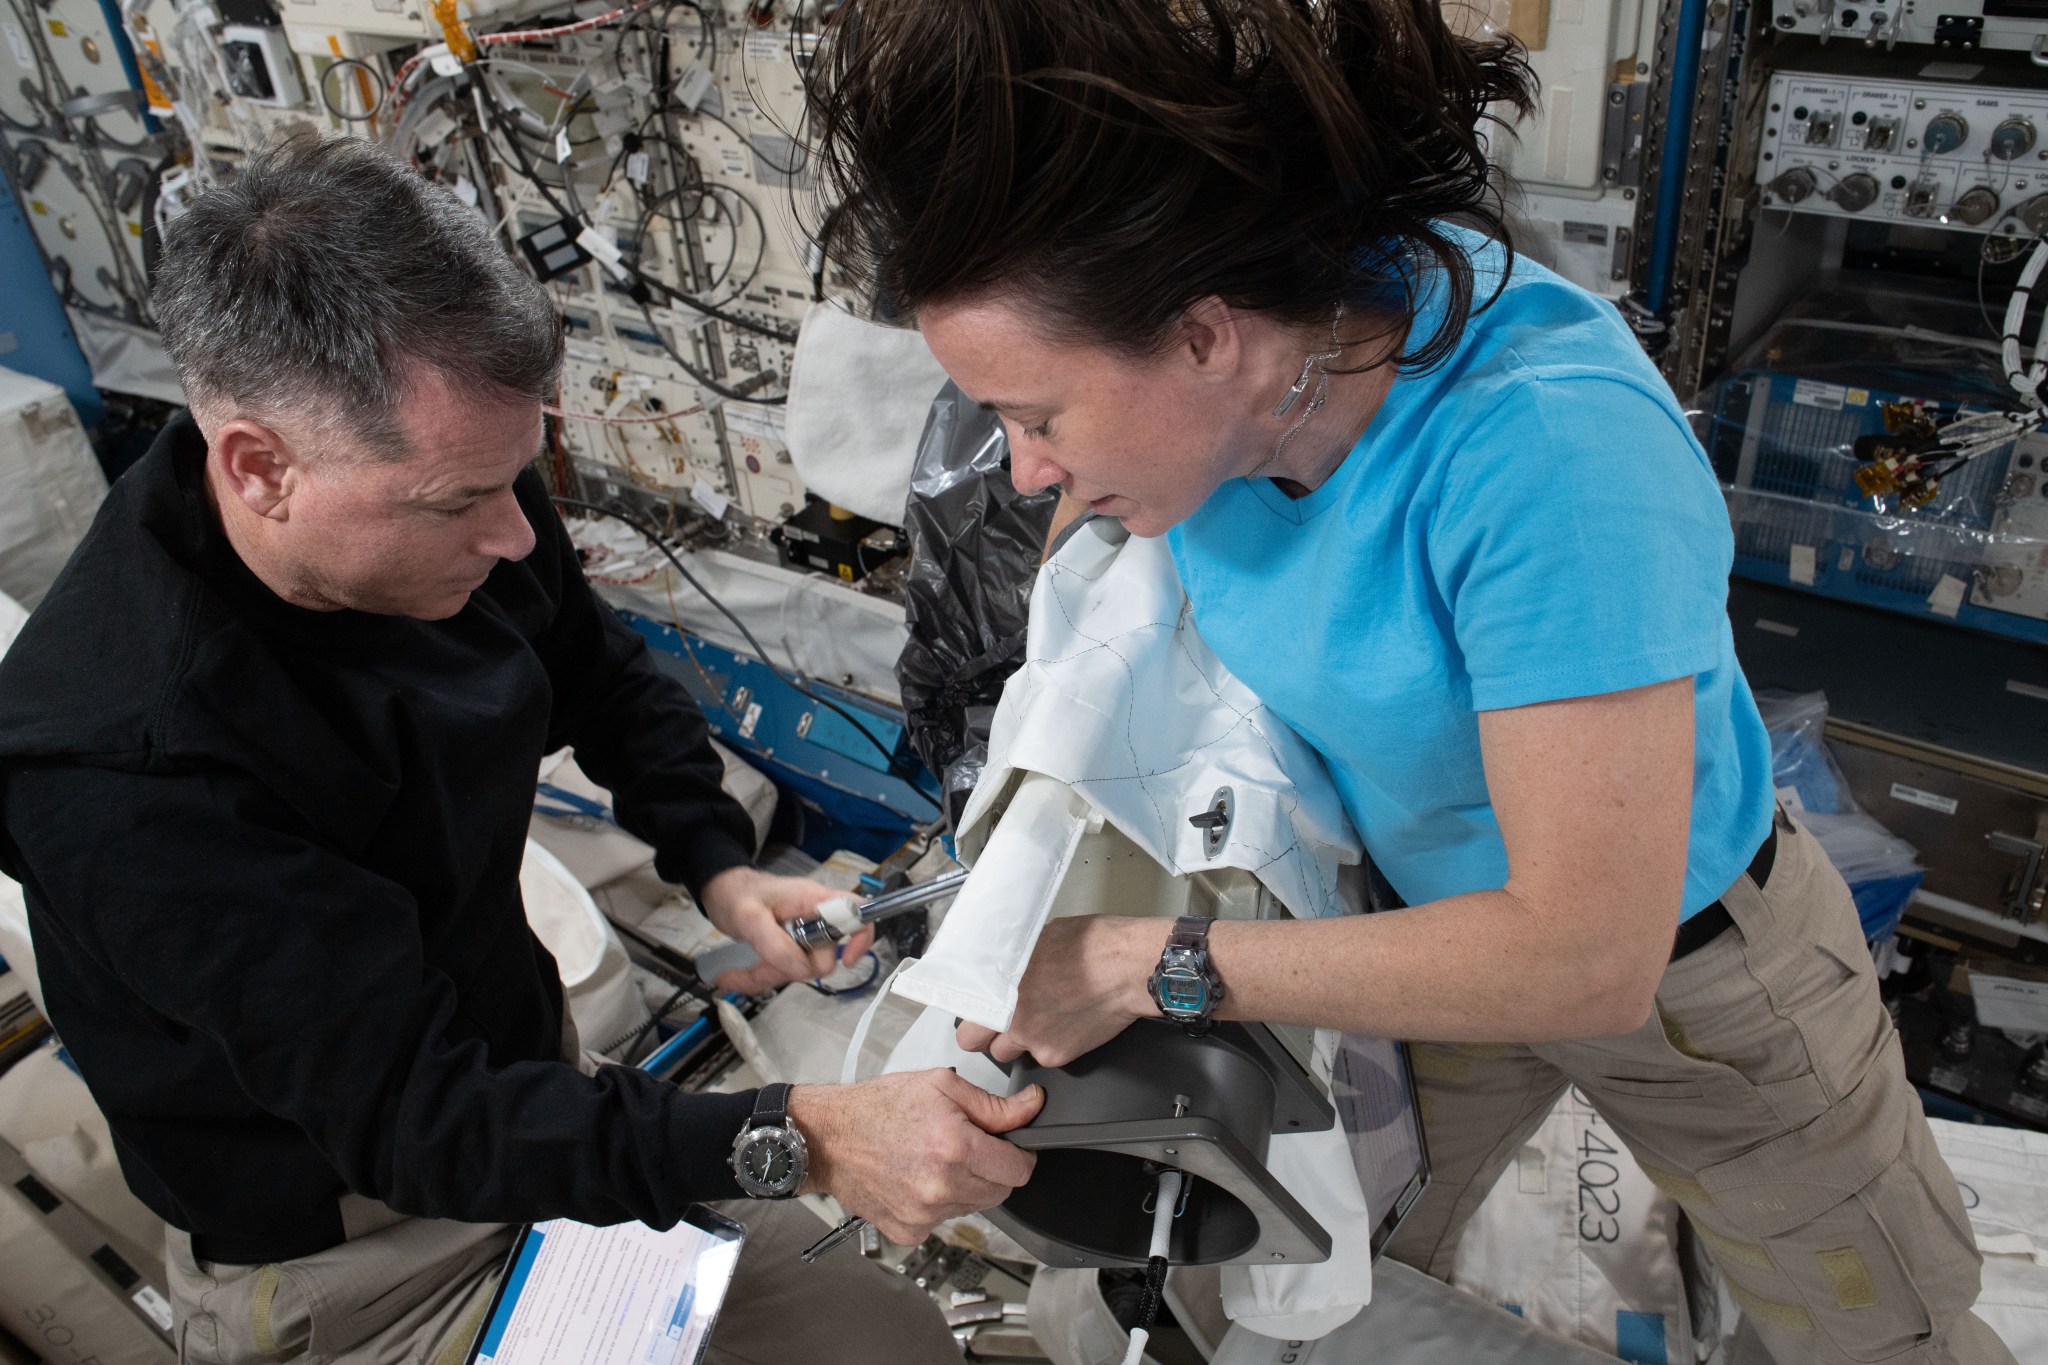 NASA astronauts and Expedition 65 Flight Engineers Shane Kimbrough and Megan McArthur aboard the International Space Station